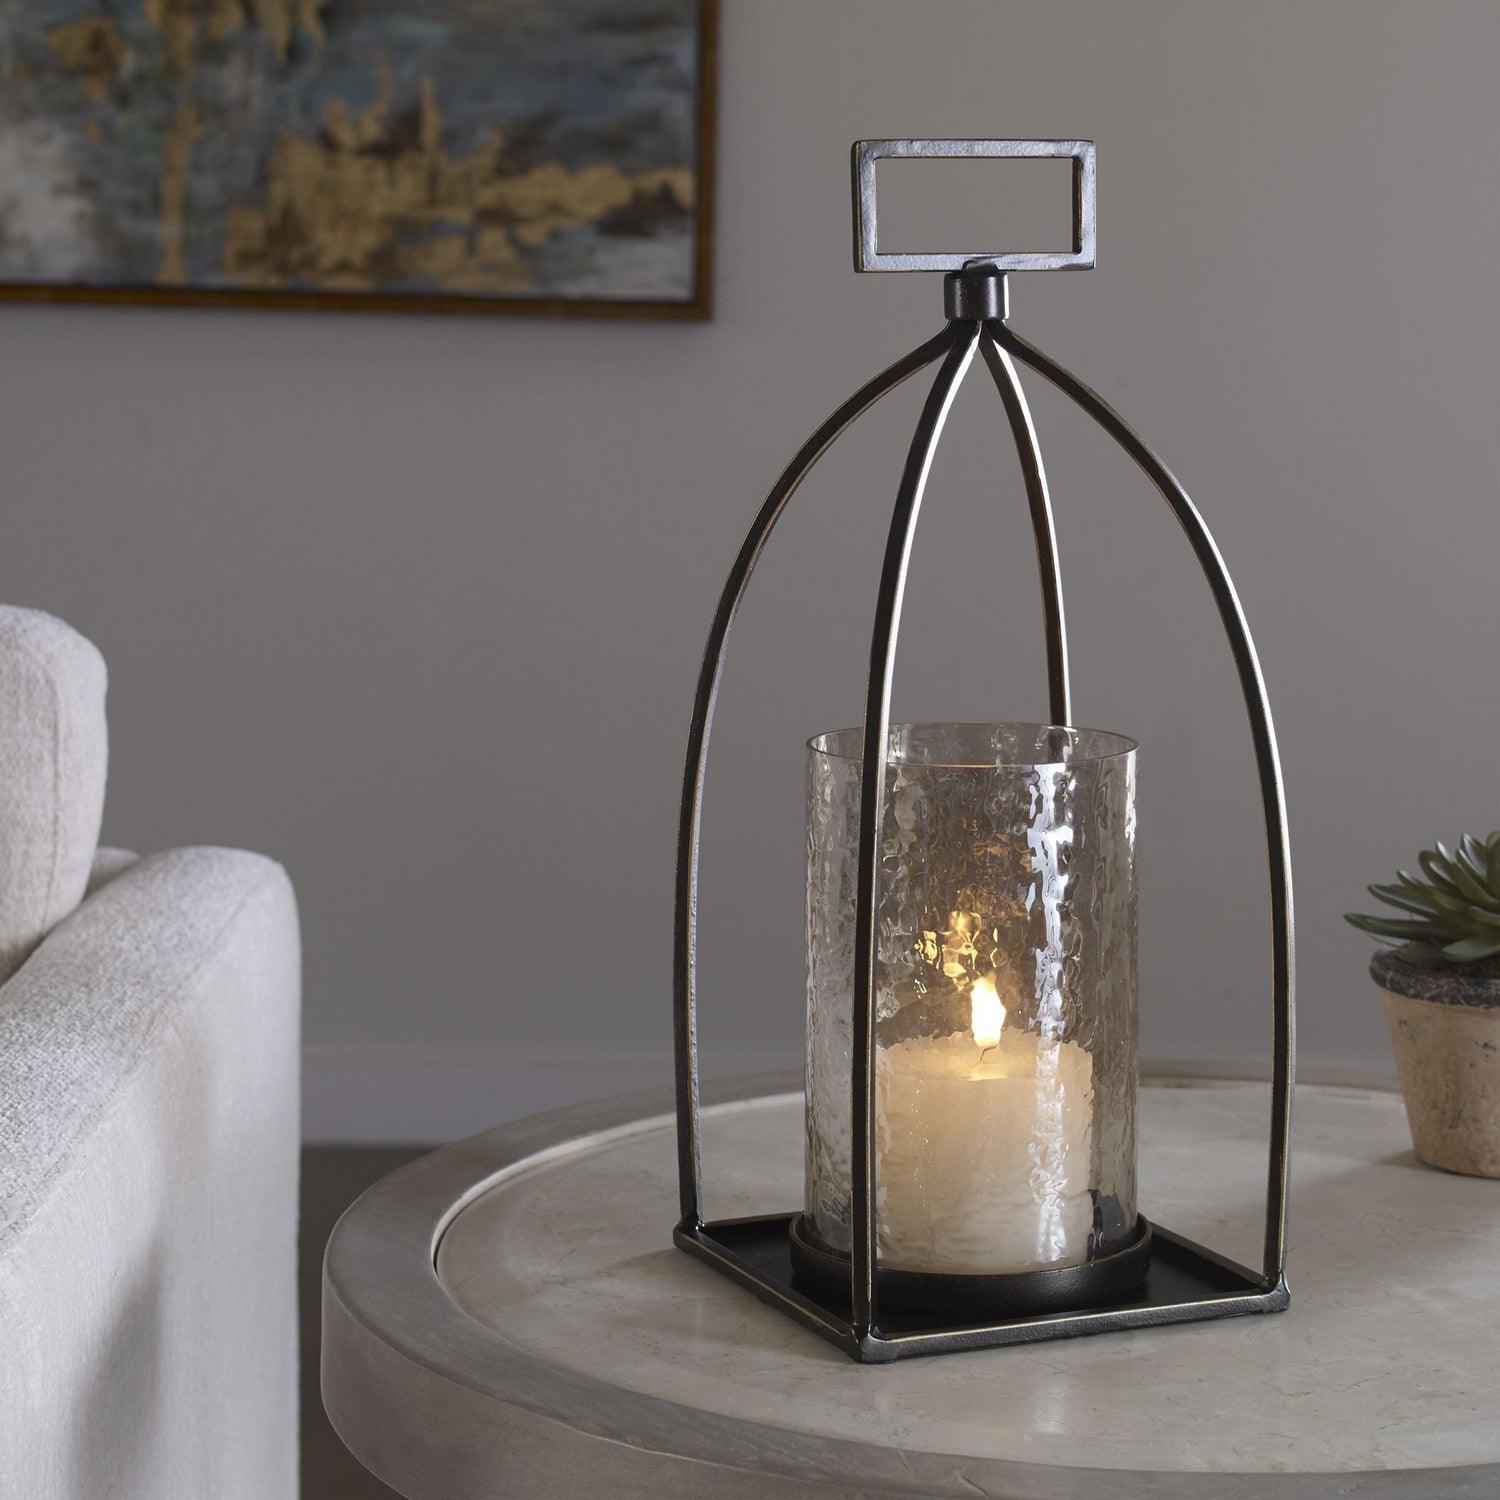 The Uttermost - Riad Candleholder - 17912 | Montreal Lighting & Hardware